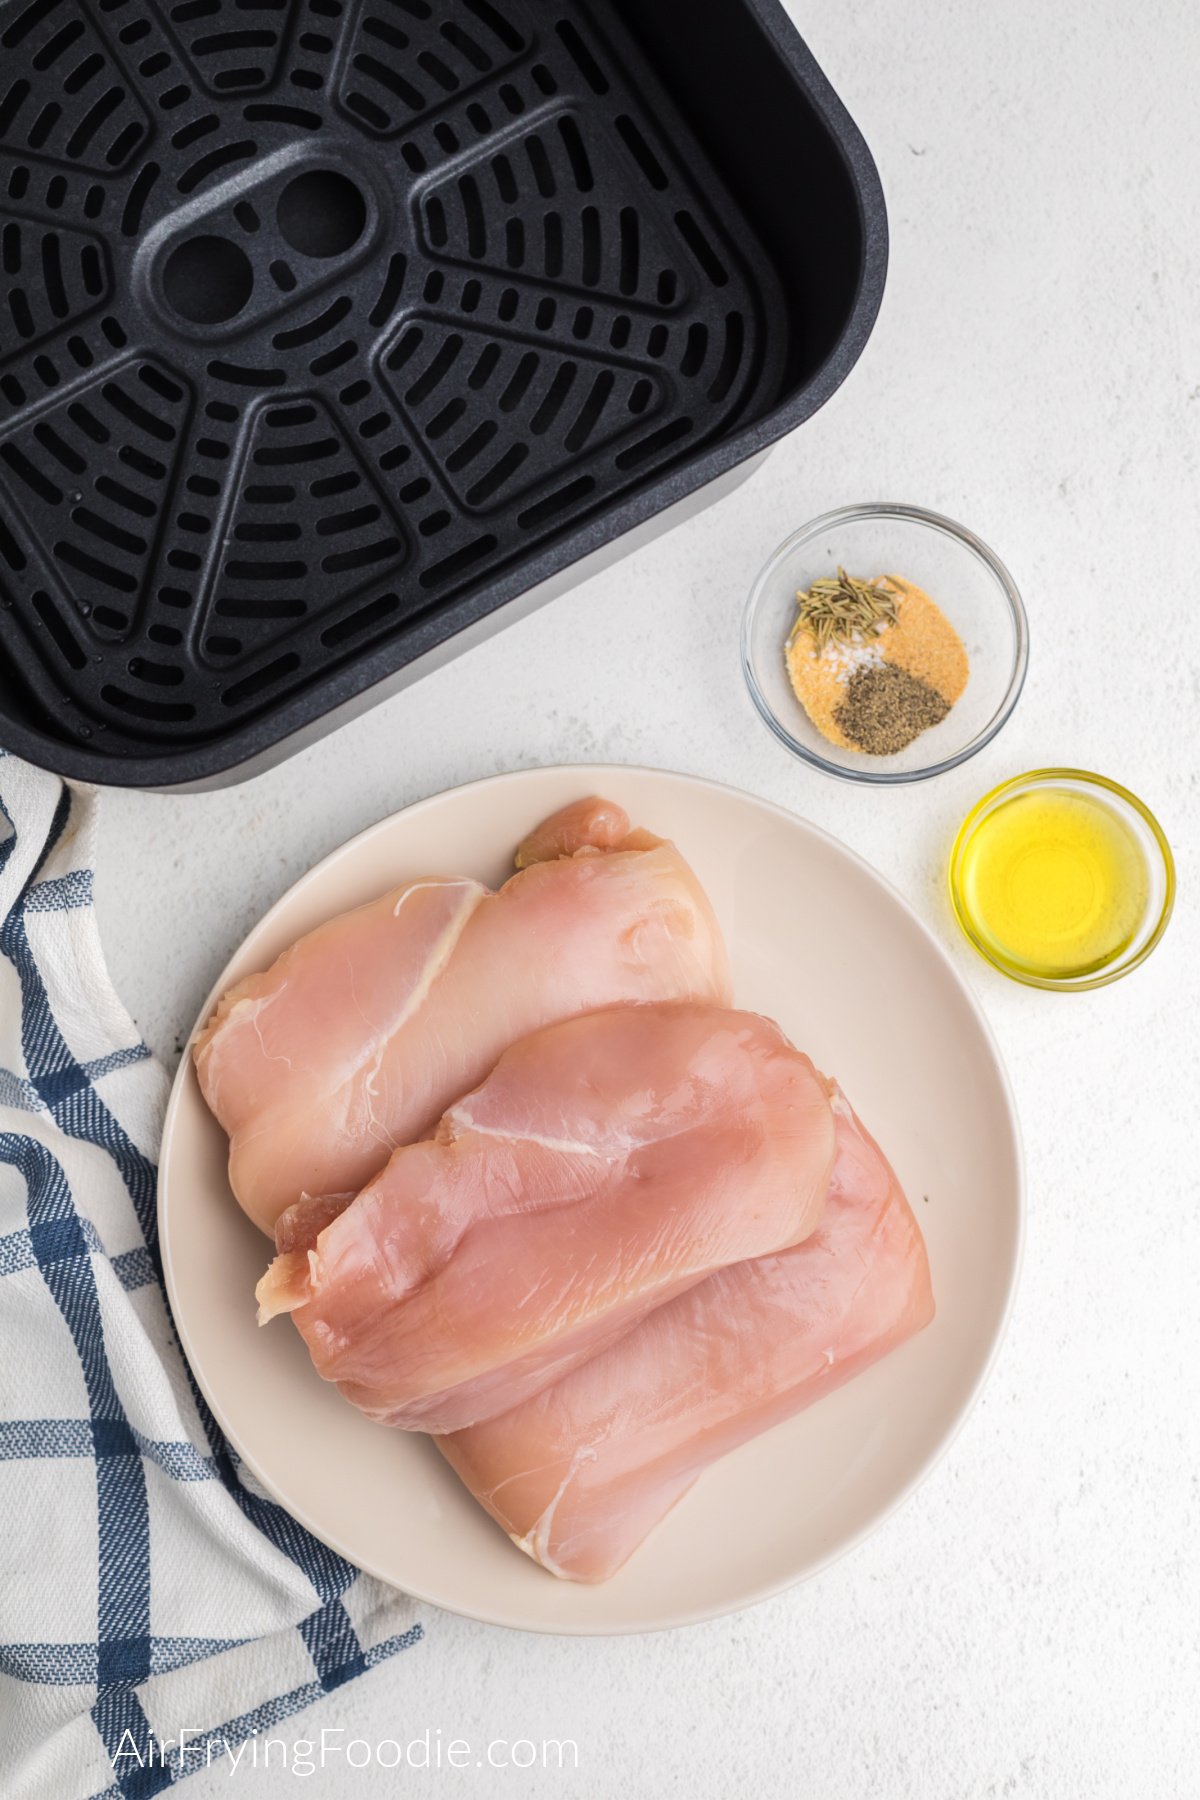 Boneless skinless chicken breasts on a white plate with a small bowl of olive oil and a bowl of seasonings. 